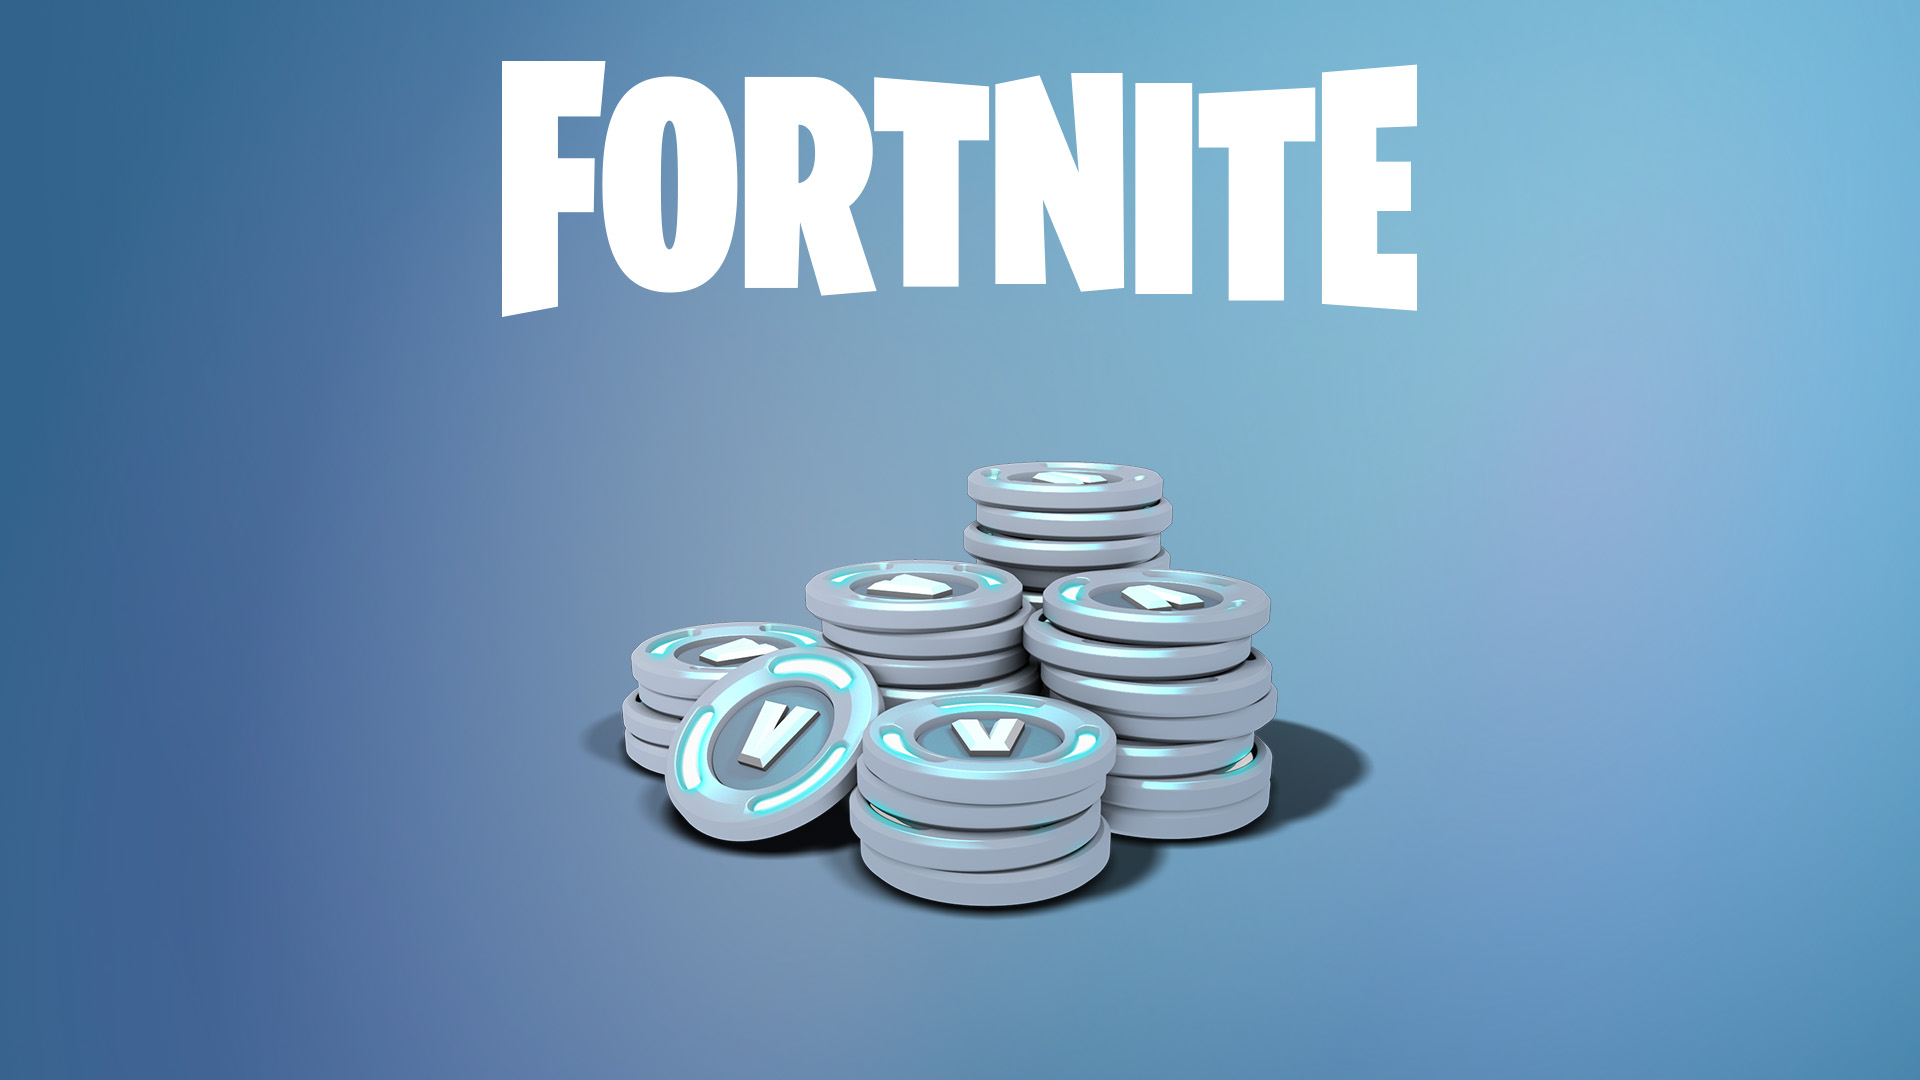 What You Did not Notice About How to Get Free v Bucks by Playing Games Is Powerful - But Very simple